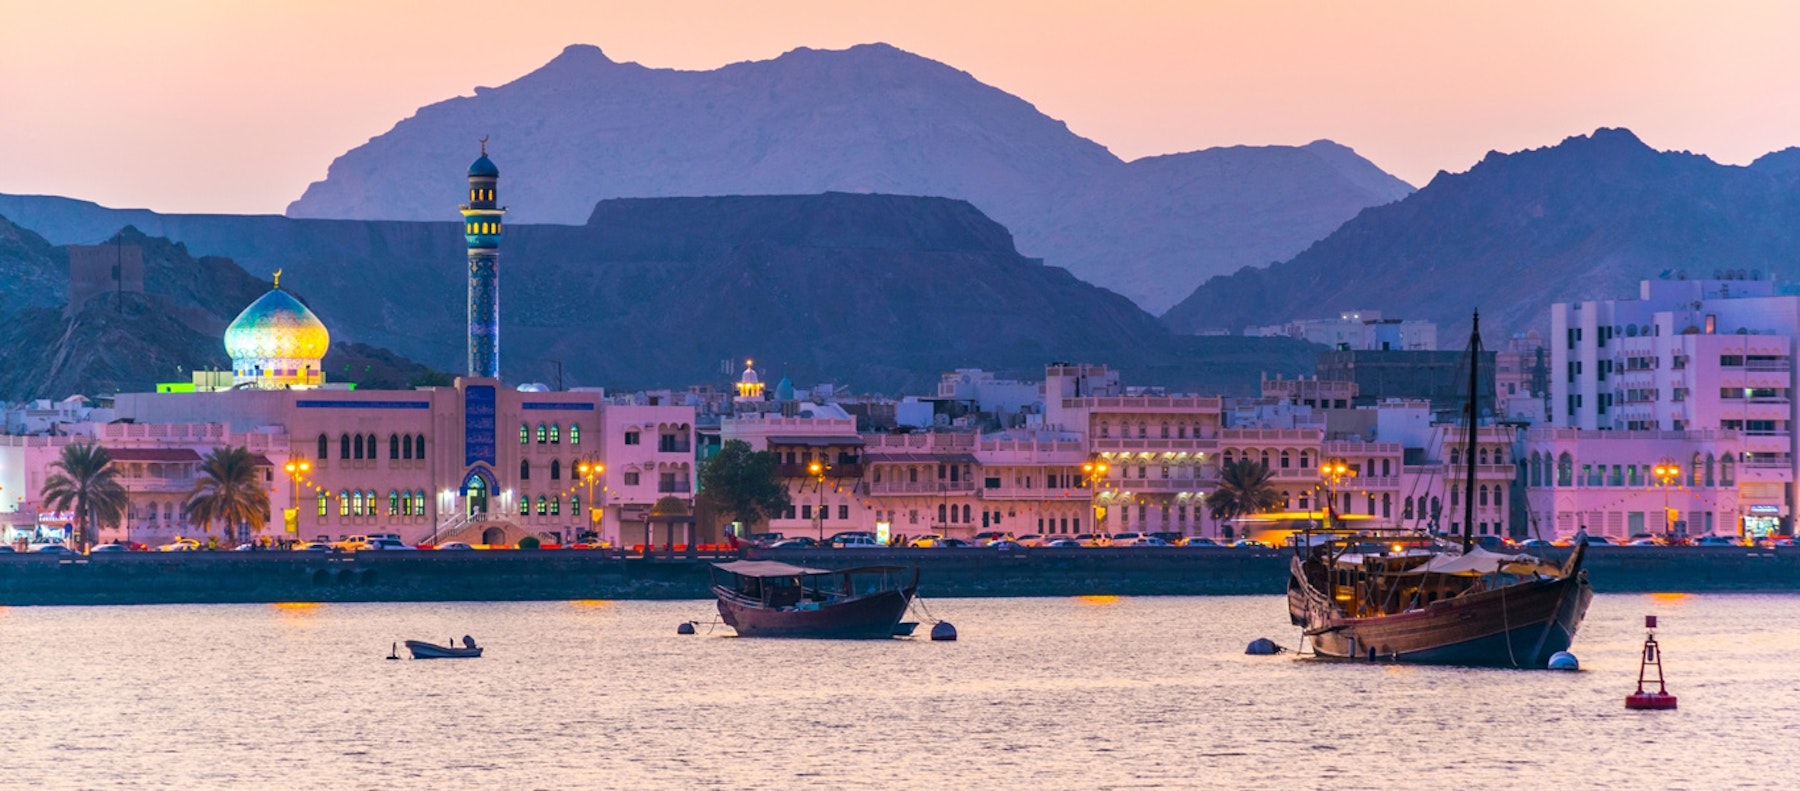 24 hours in Oman's capital city, Muscat | Black Tomato